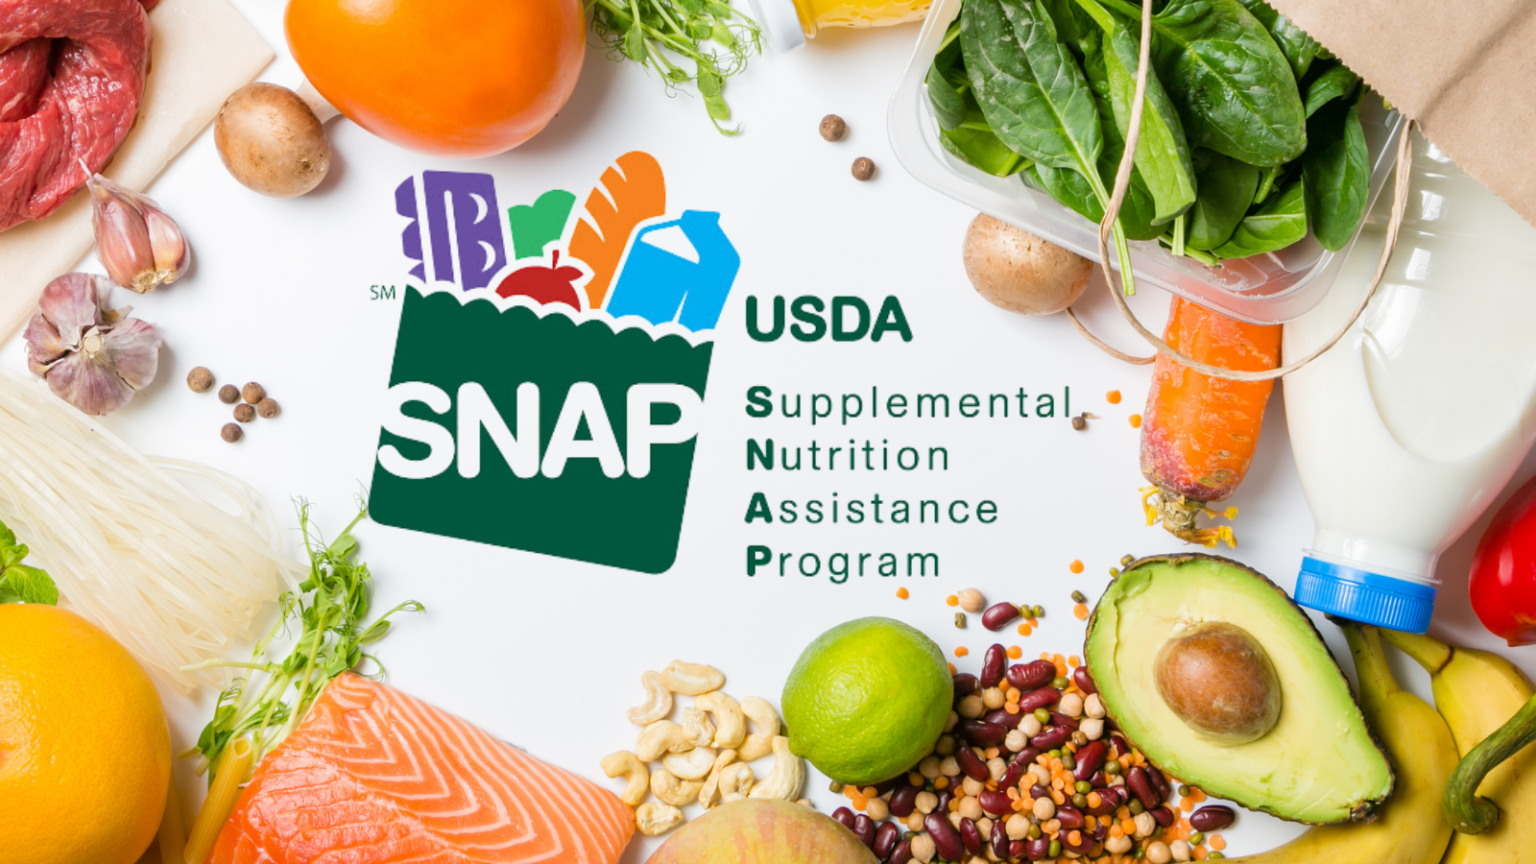 What You Need To Know About the Supplemental Nutrition Assistance